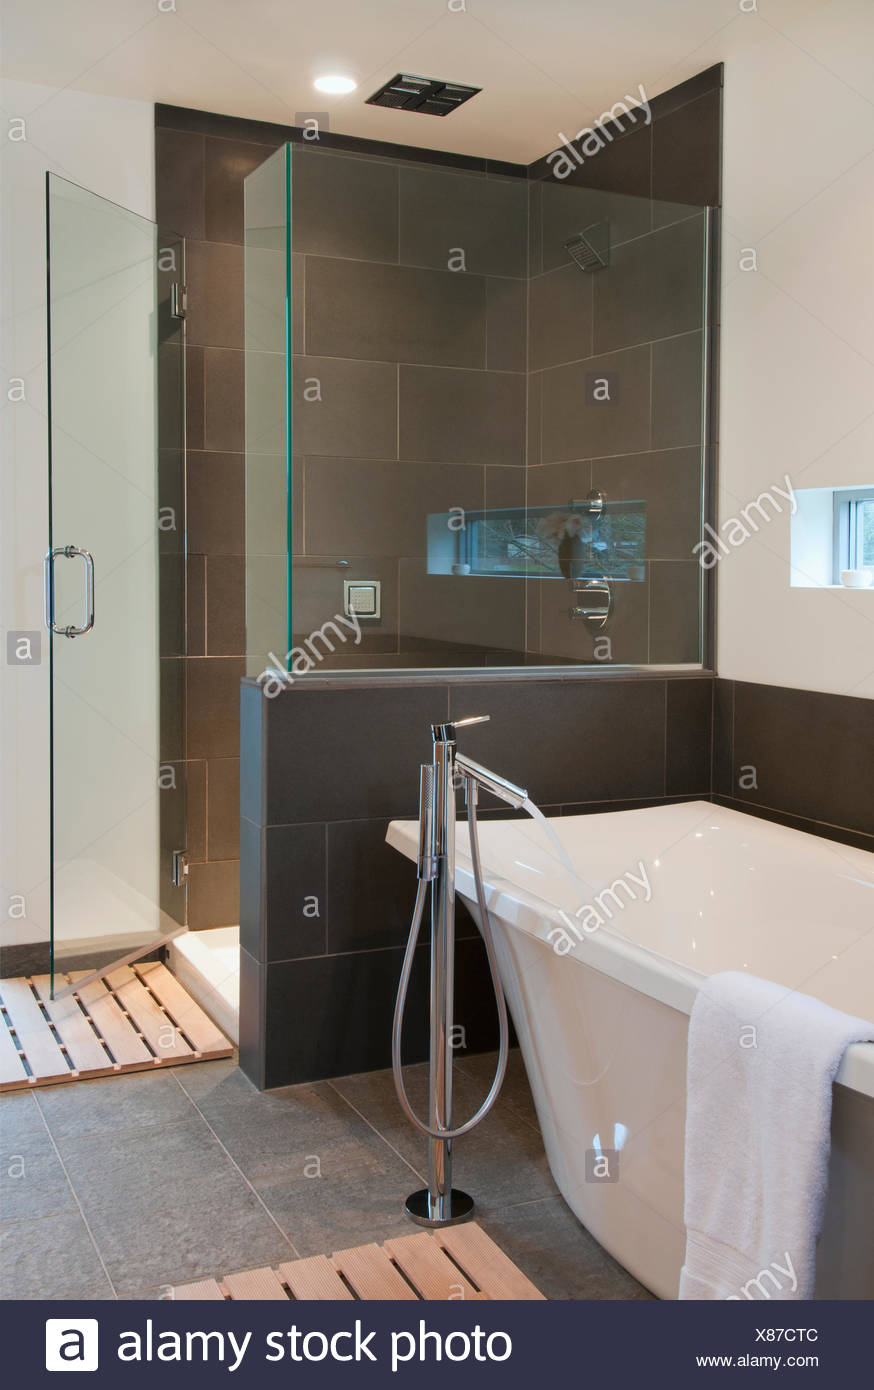 Bathtub And Shower Stall In Contemporary Bathroom Victoria